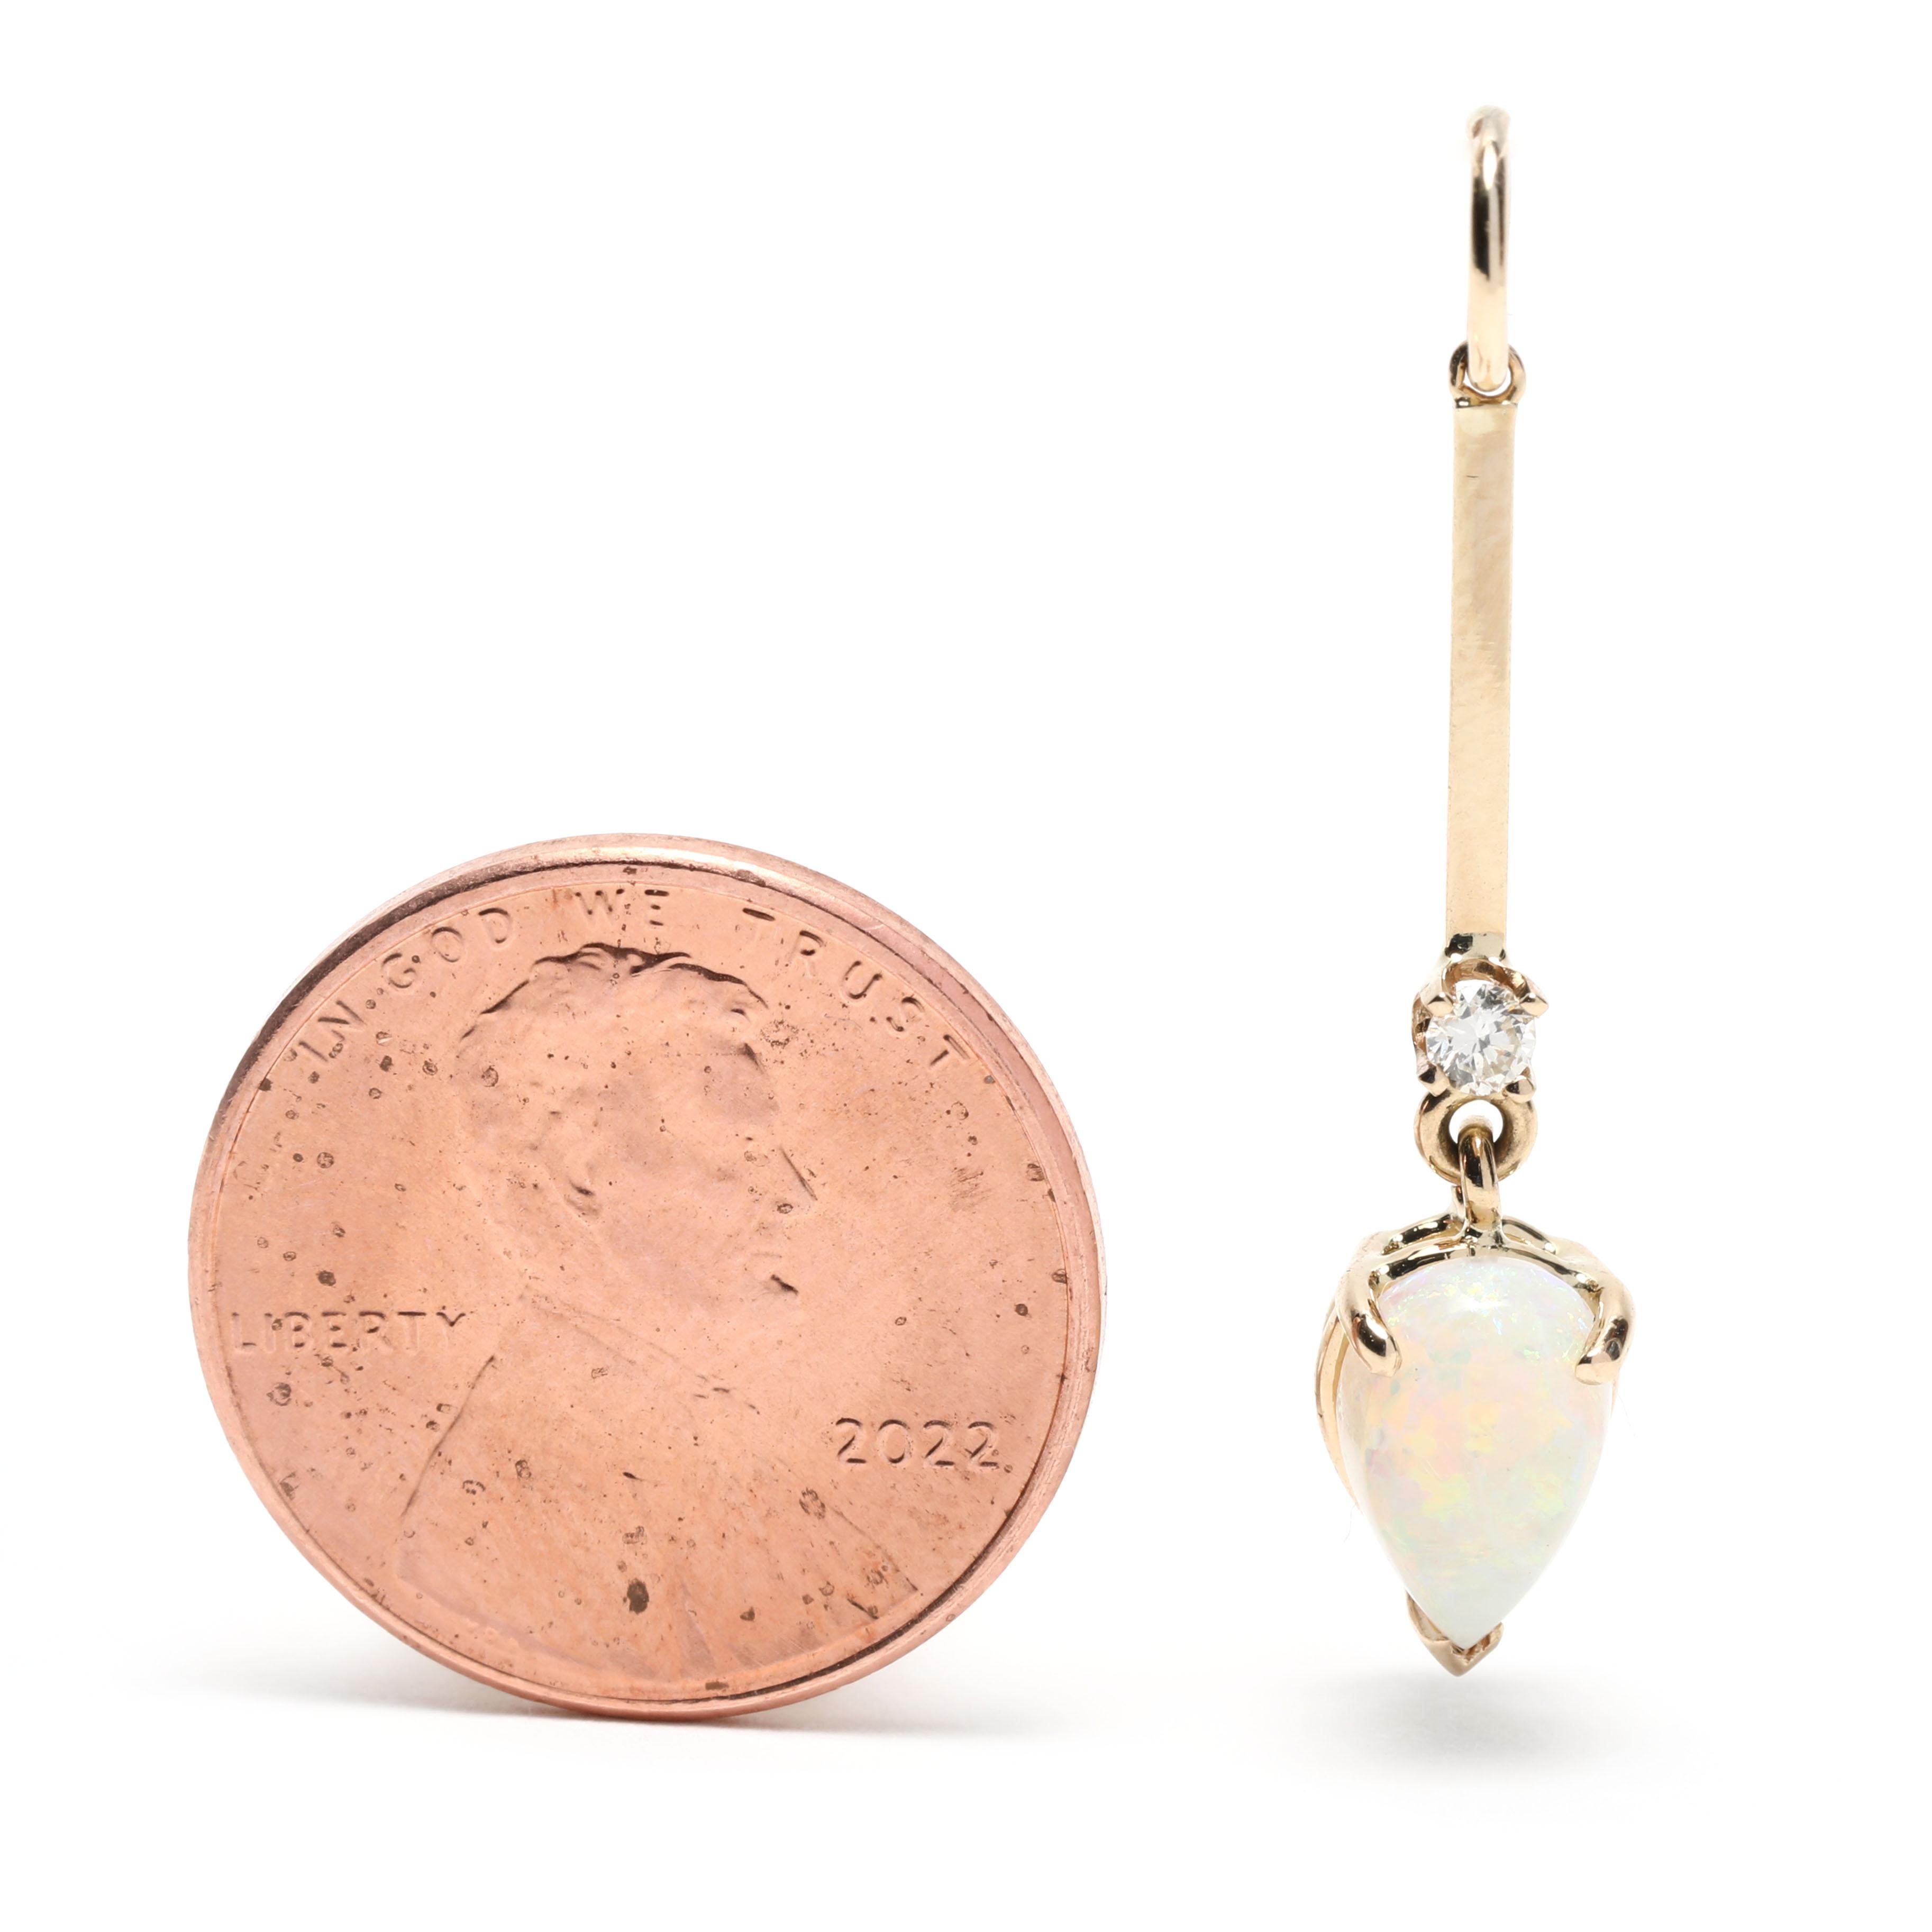 This 0.79ctw pear opal diamond dangle charm is a stunning addition to any jewelry collection. Crafted in 14K yellow gold, its 1.25